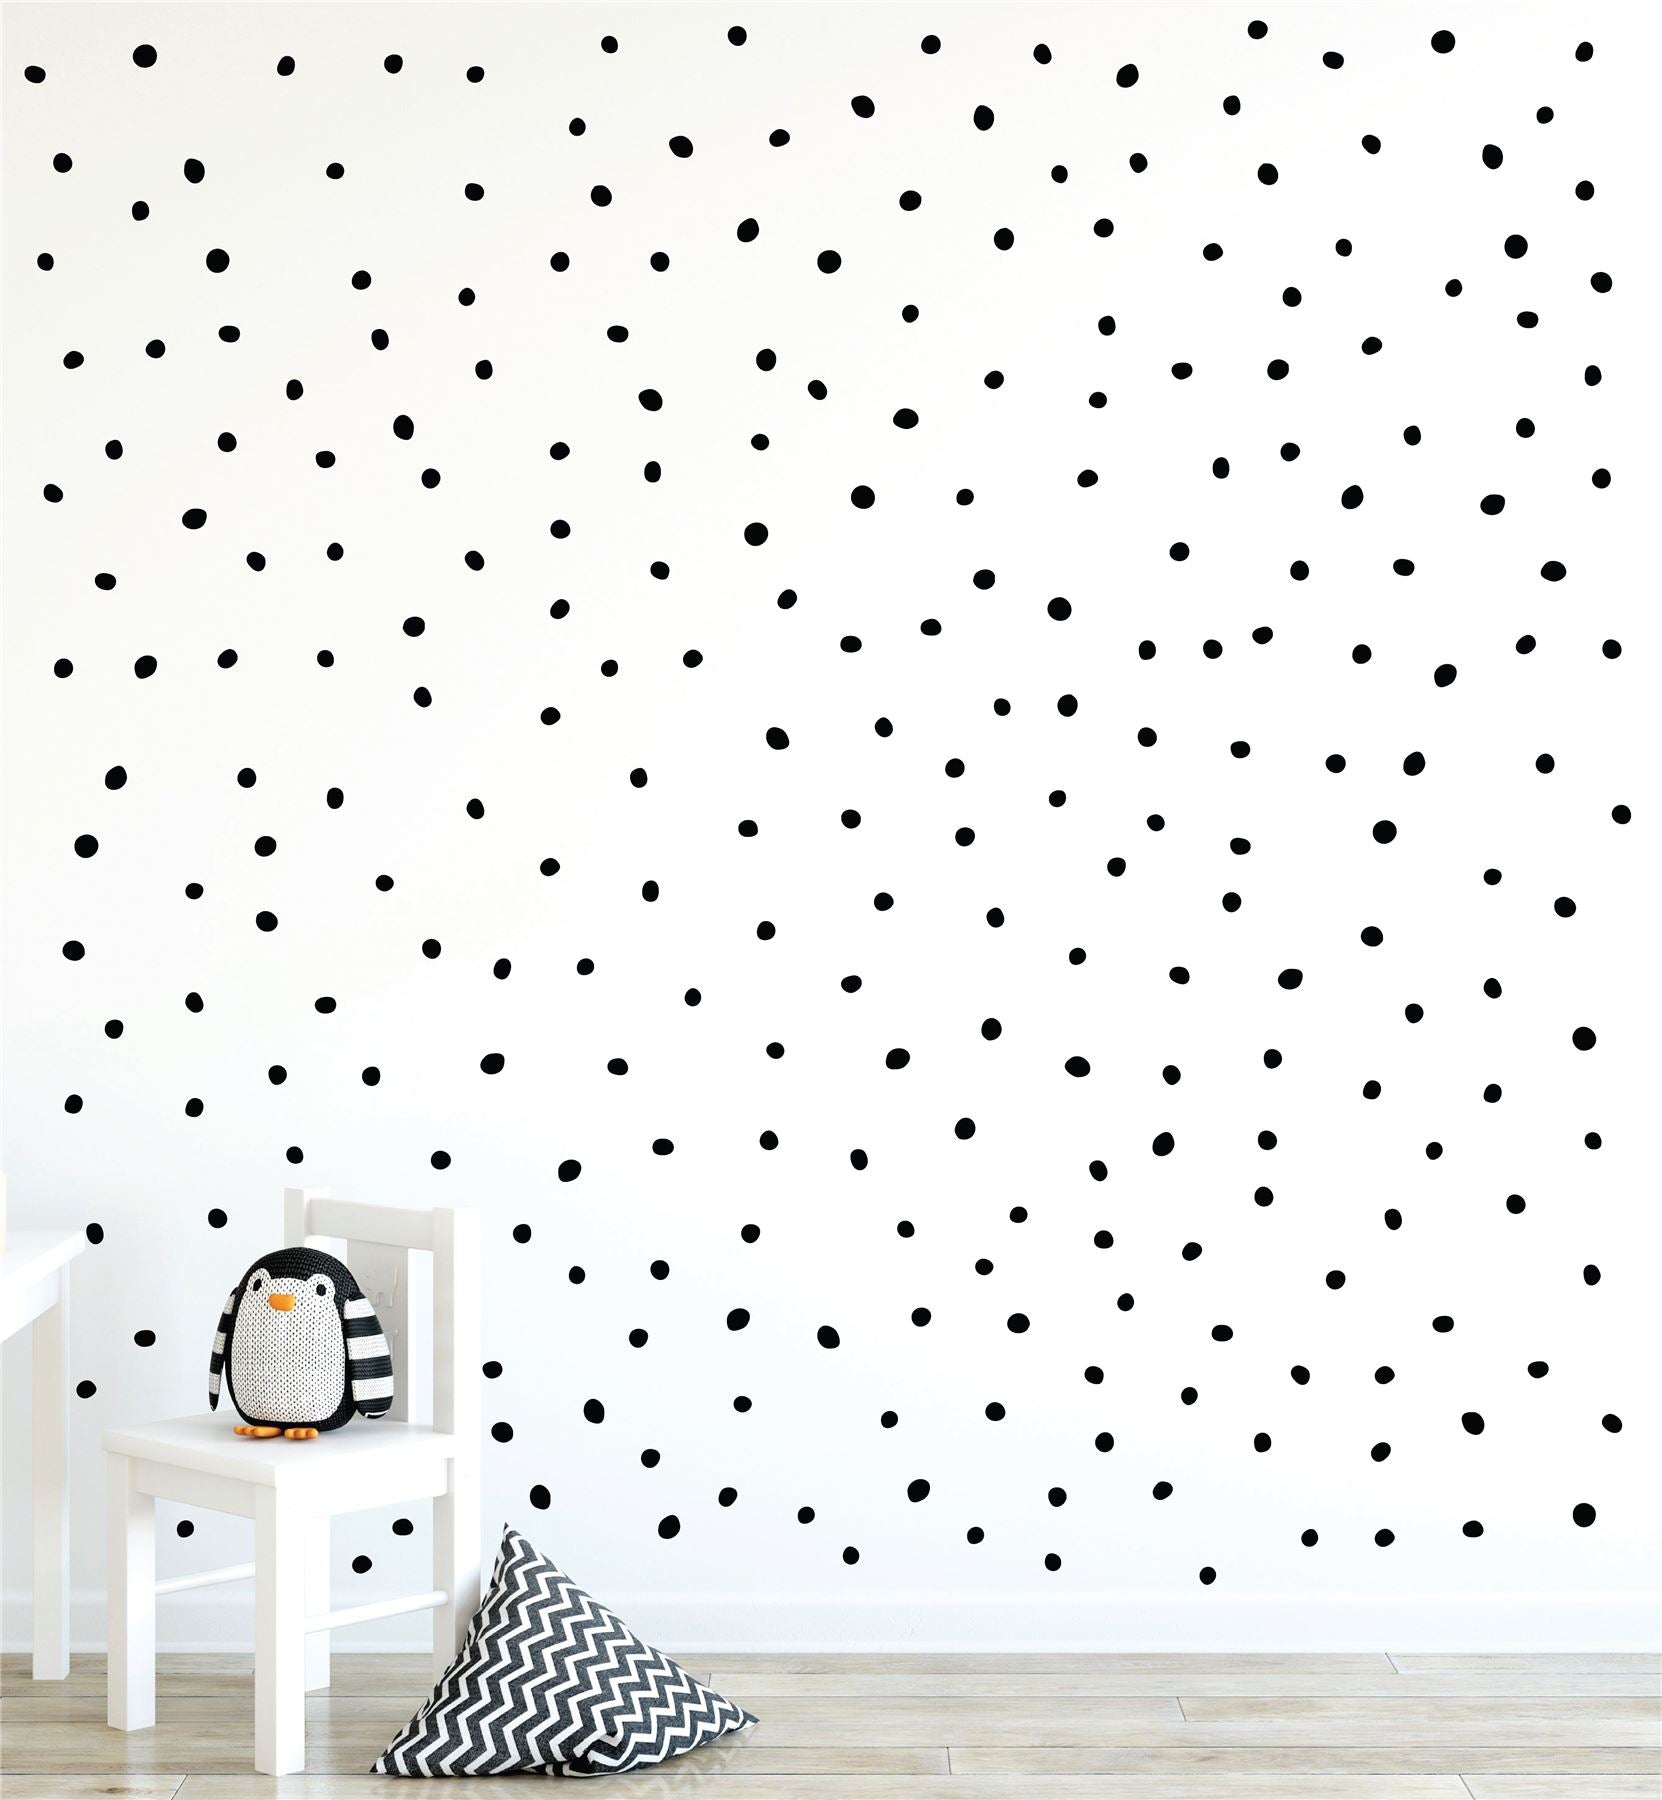 Handrawn Dots (Collection Of 244) Wall Sticker Decal